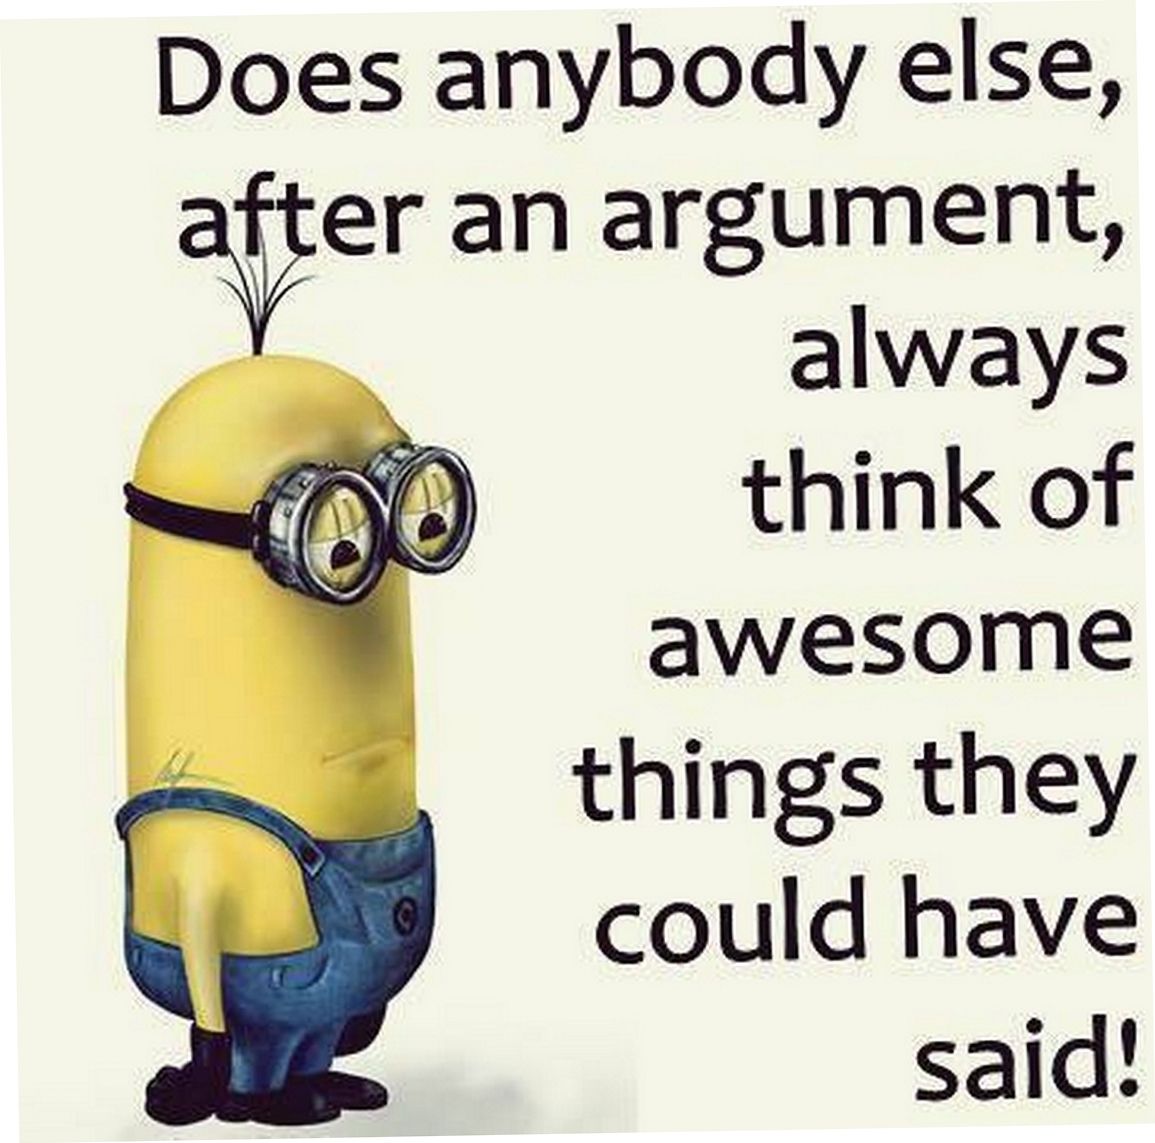 Today Minion Quotes. Sarcastic quotes funny, Funny minion quotes, Minions funny image